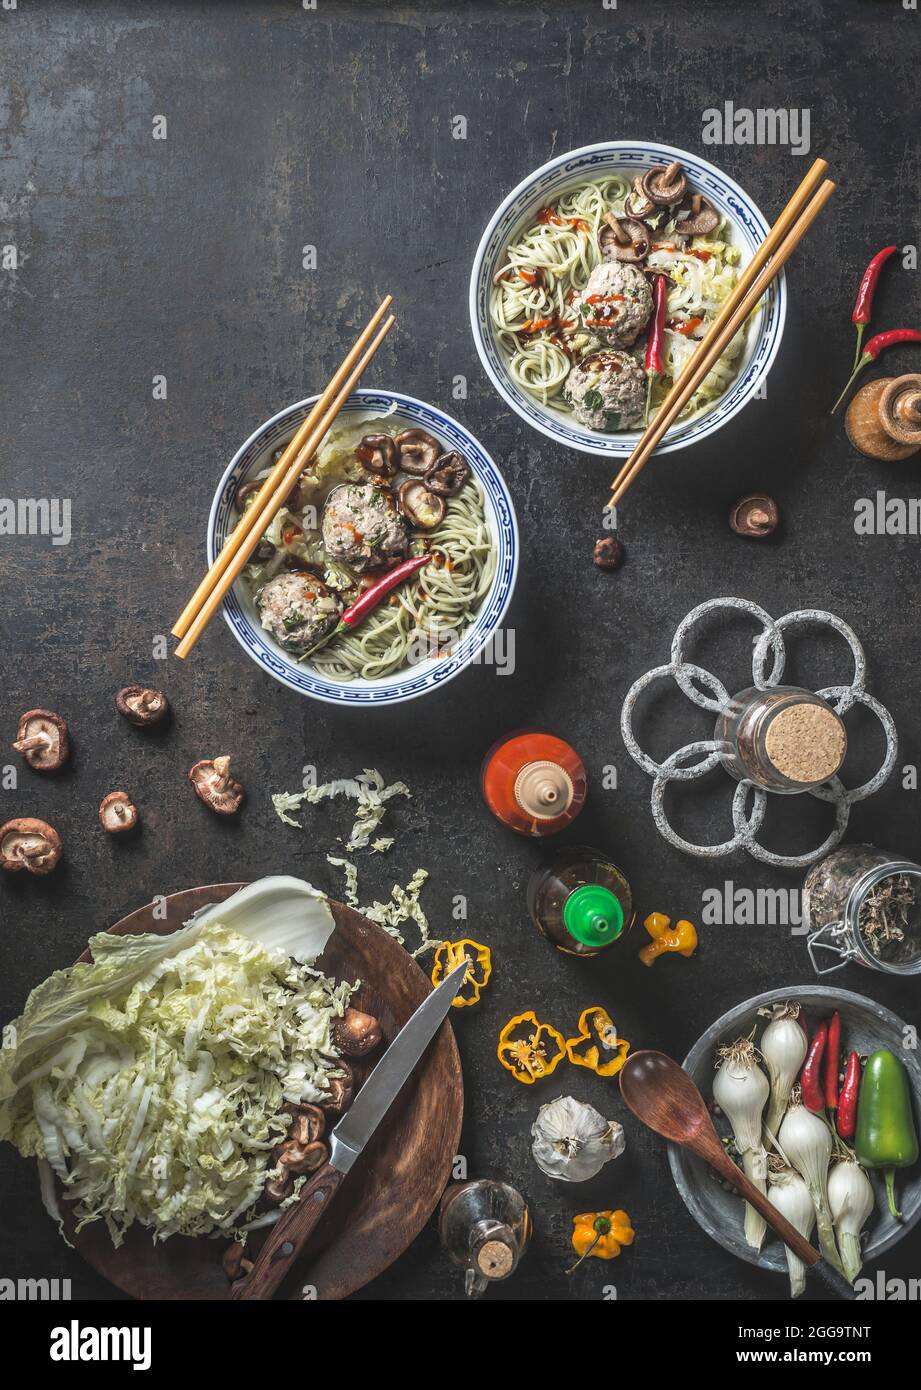 Asian food. Bowls with noodles and Shiitake mushrooms, chili pepper , chopsticks and meatballs on dark rustic background with fresh Asian cuisine ingr Stock Photo